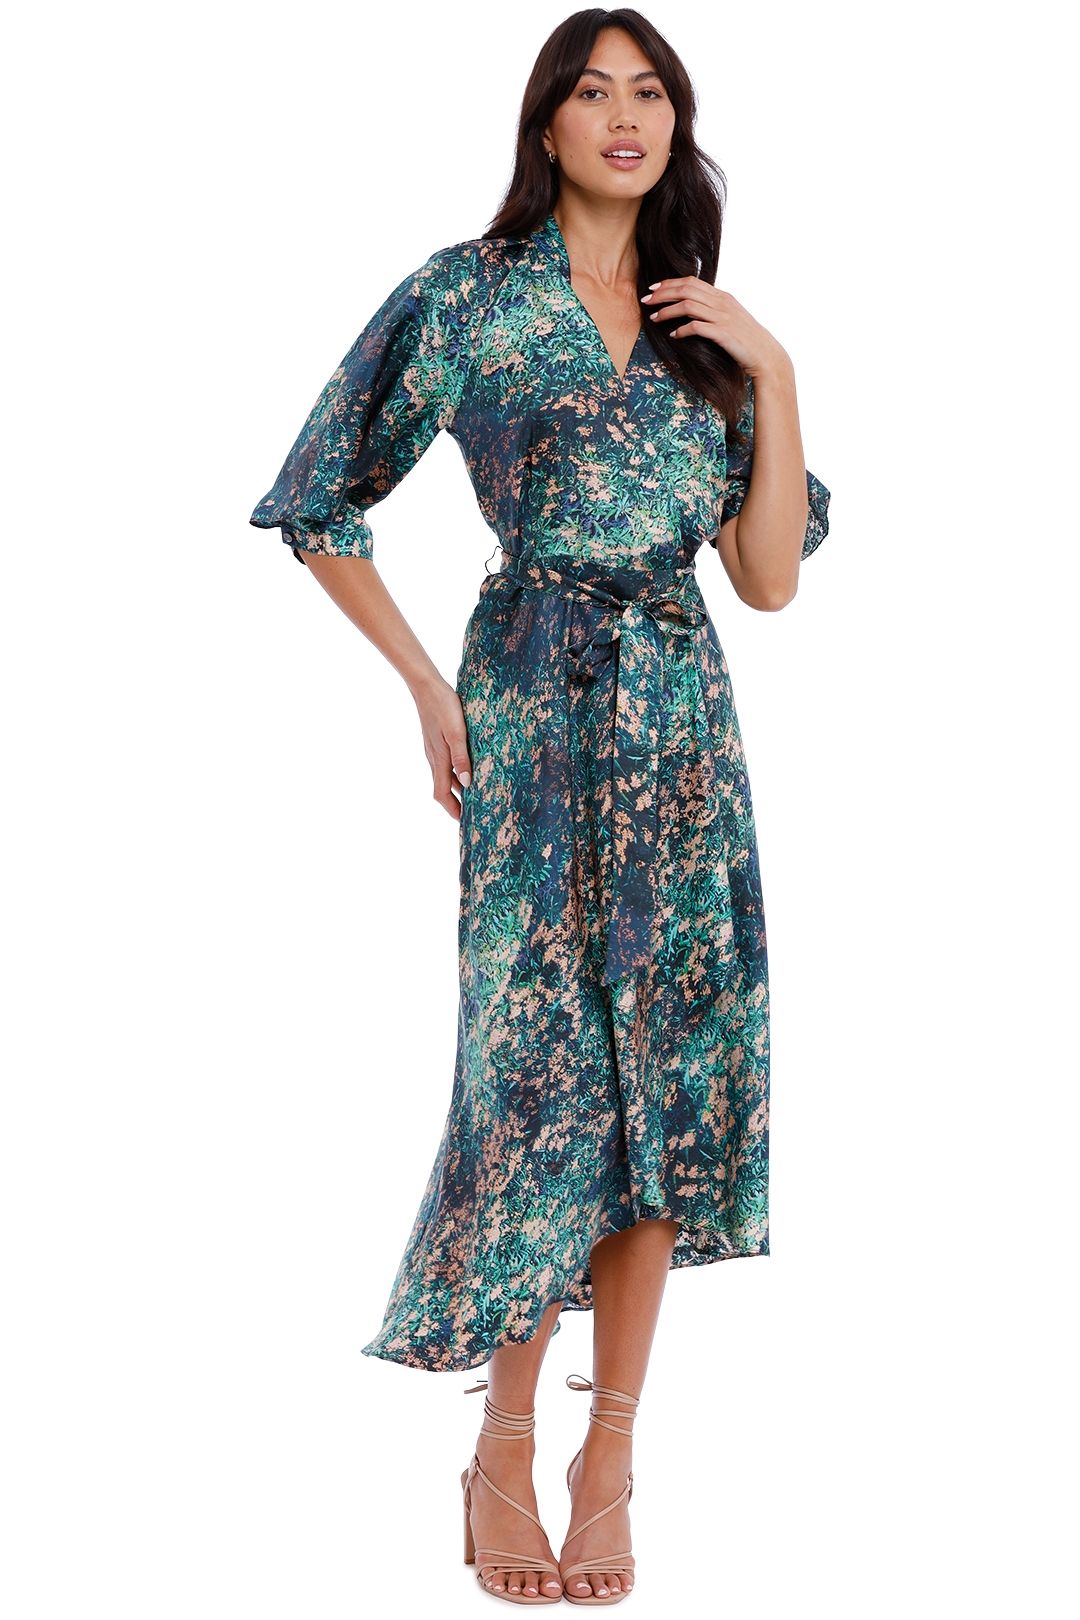 Ginger and Smart Night Grass Wrap Dress